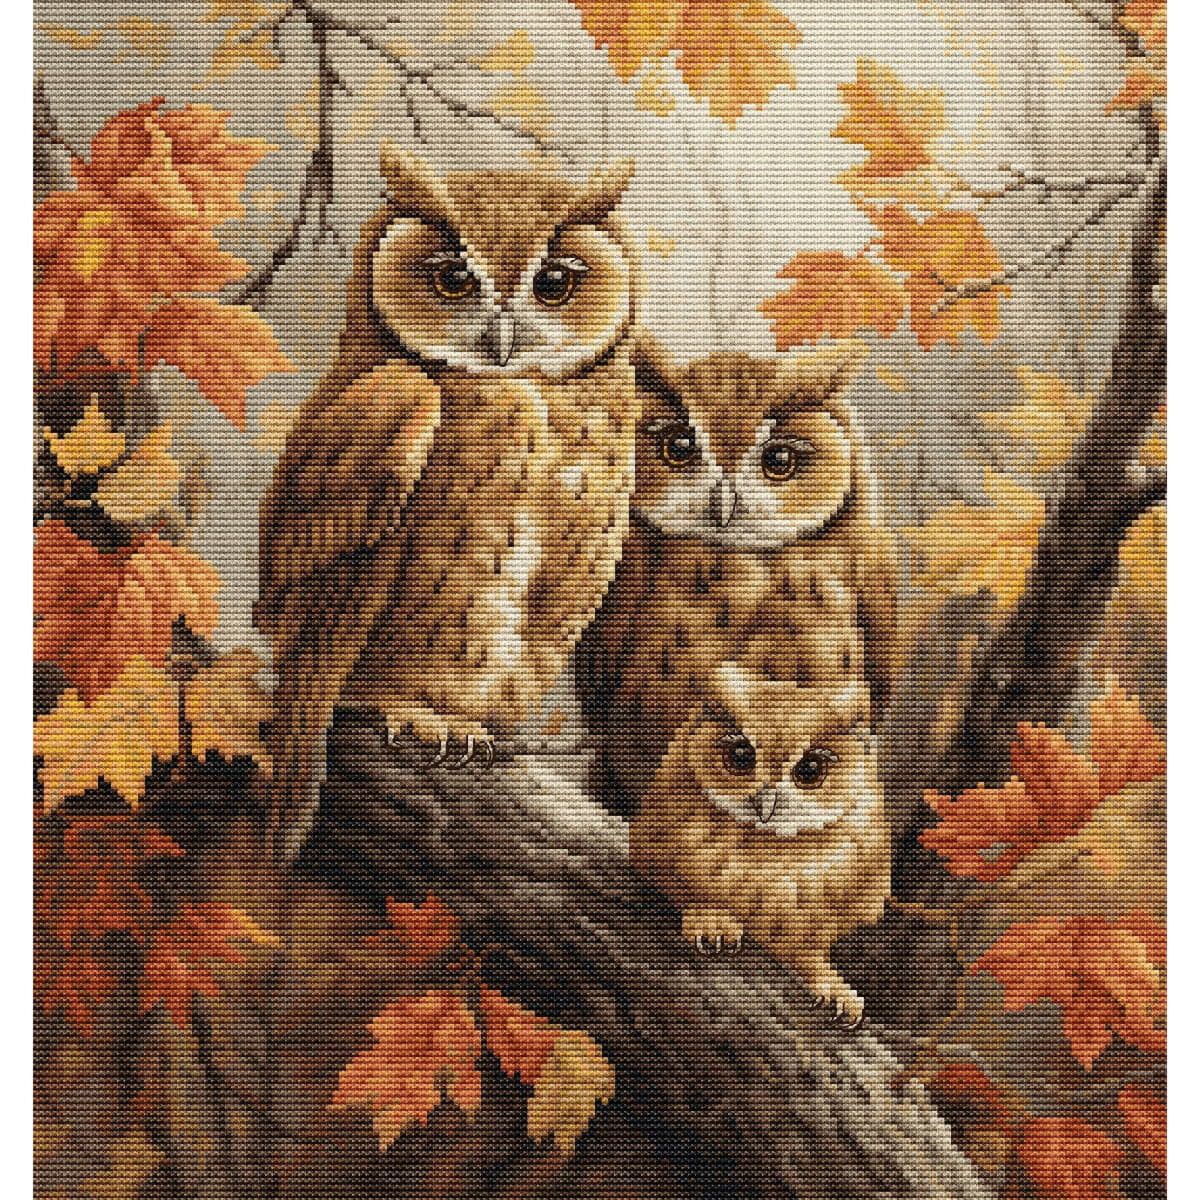 A detailed painting shows three owls sitting close...